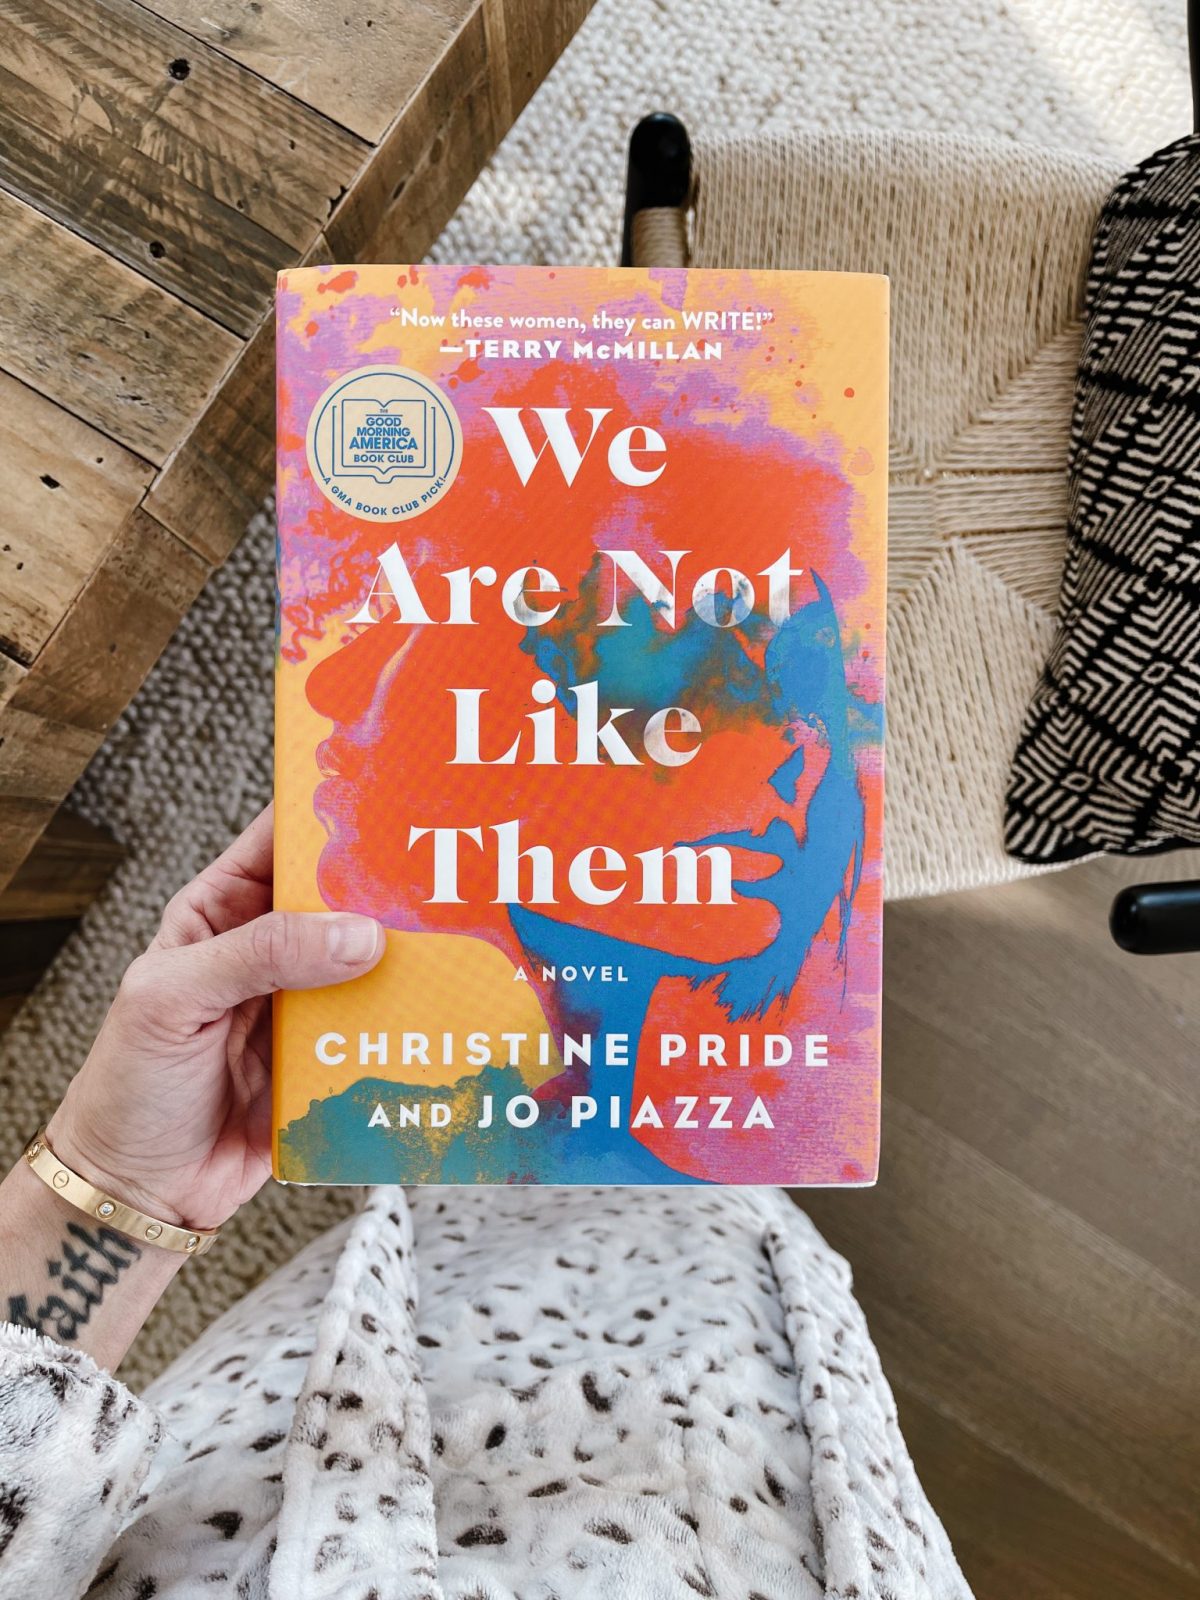 Suzanne holding the book, We Are Not Like Them by Christine Pride and Joe Piazza